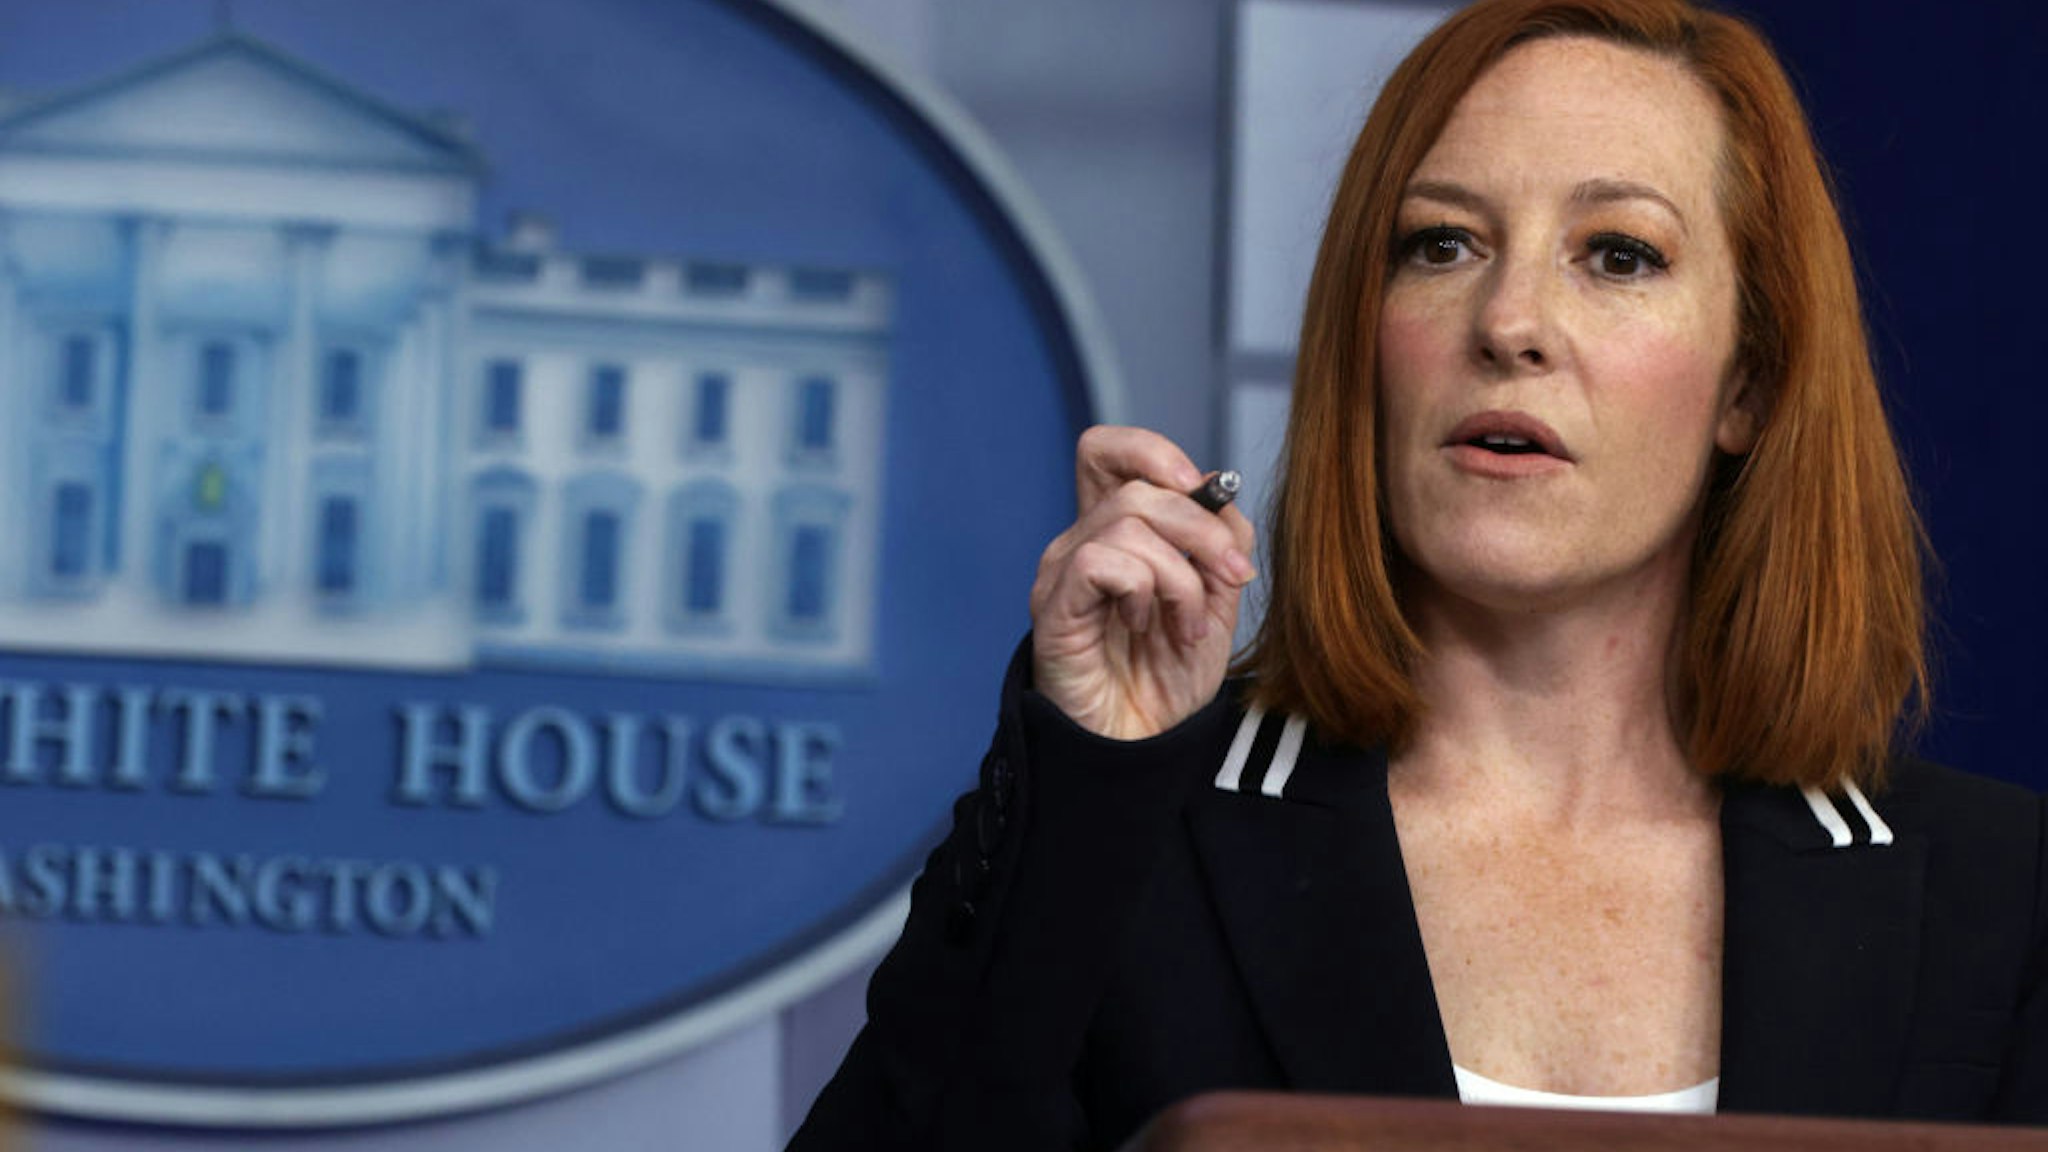 WASHINGTON, DC - APRIL 21: White House Press Secretary Jen Psaki speaks during a daily press briefing at the James Brady Press Briefing Room of the White House on April 21, 2021 in Washington, DC. Psaki held the daily briefing to answer questions from members of the press. (Photo by Alex Wong/Getty Images)